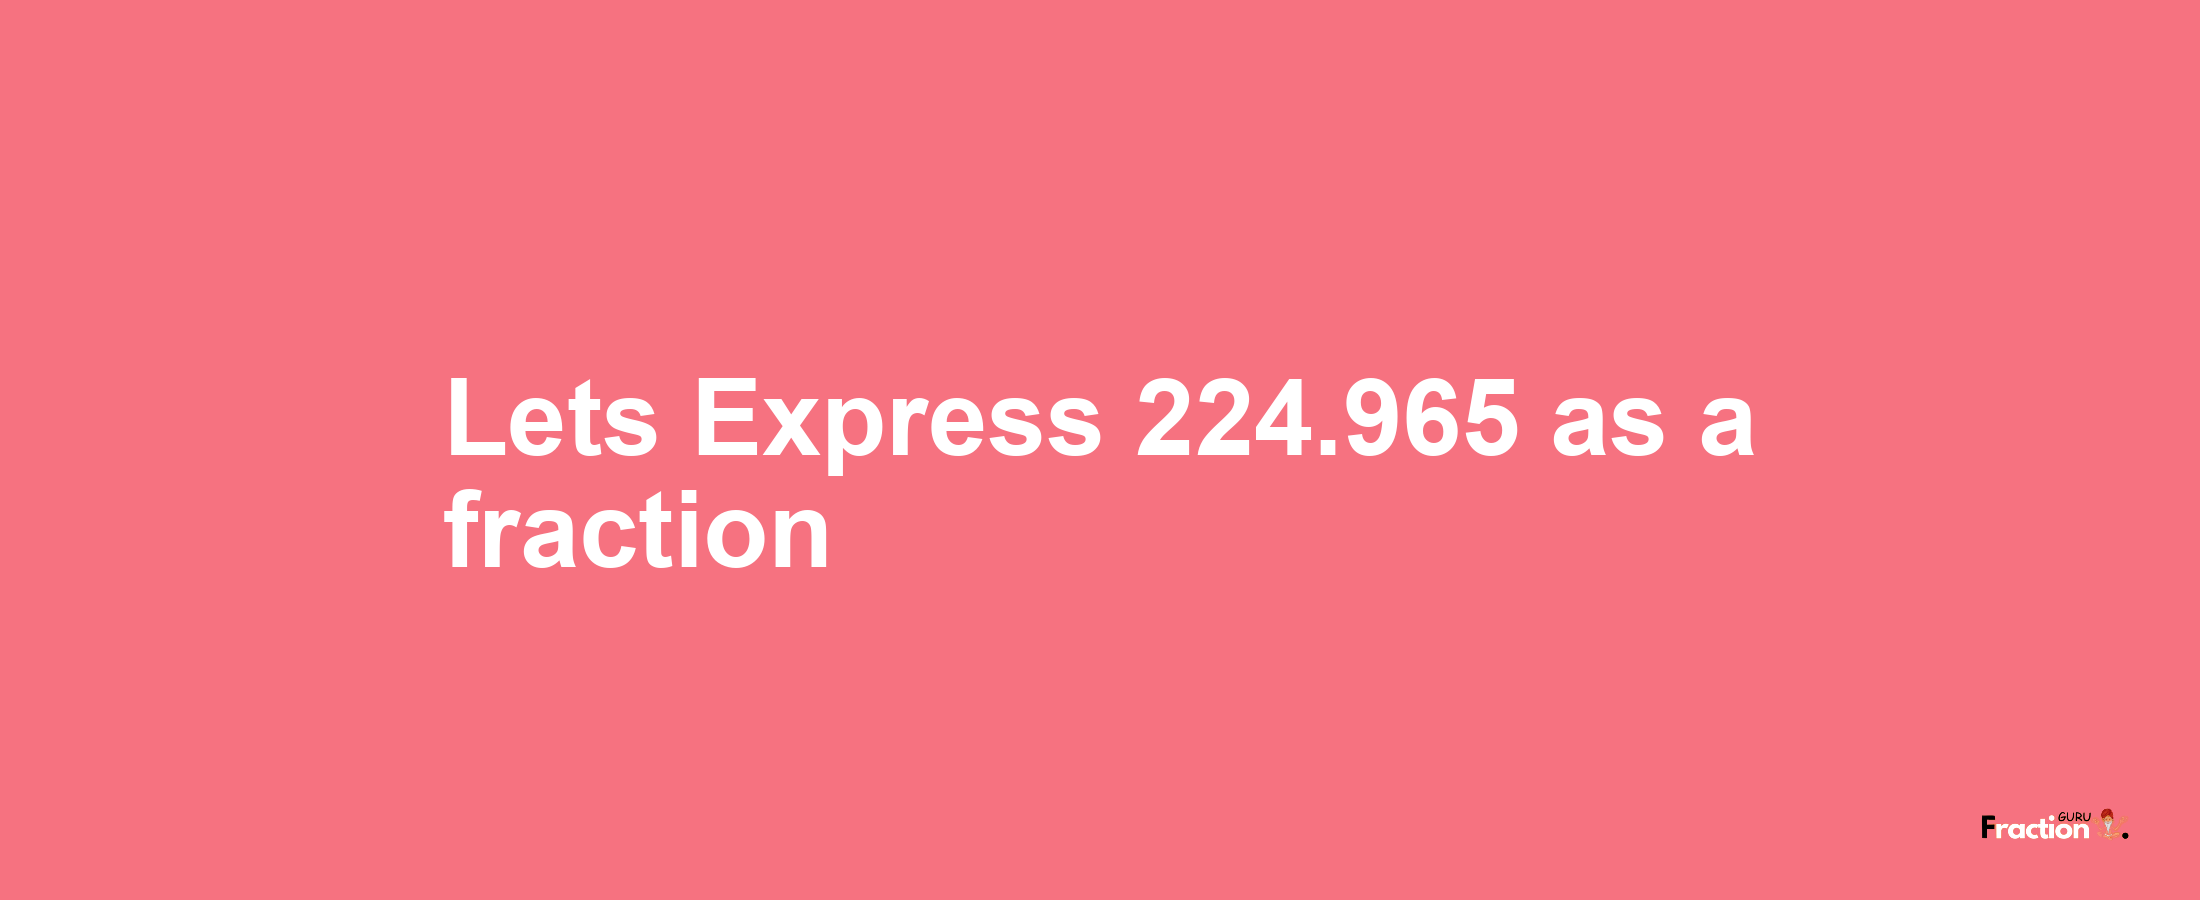 Lets Express 224.965 as afraction